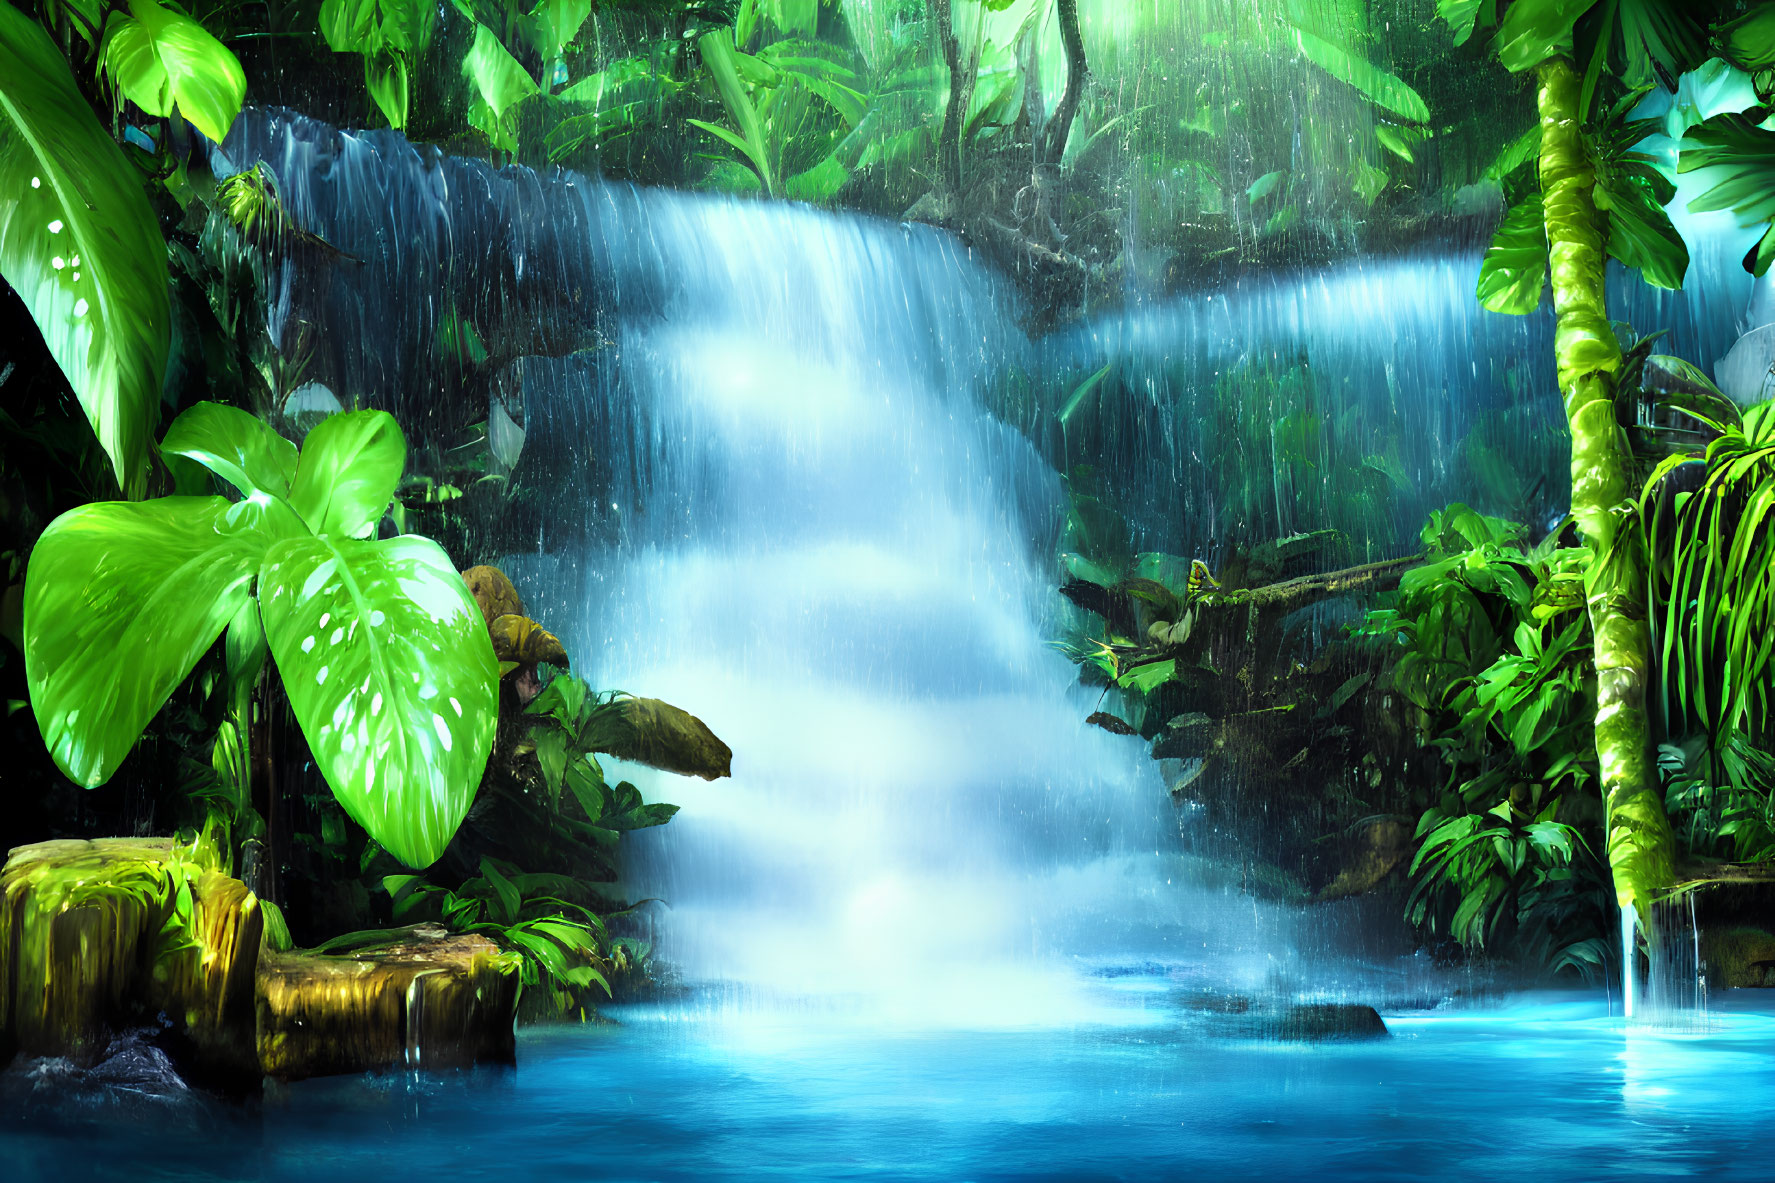 Tranquil Tropical Waterfall Surrounded by Lush Green Foliage